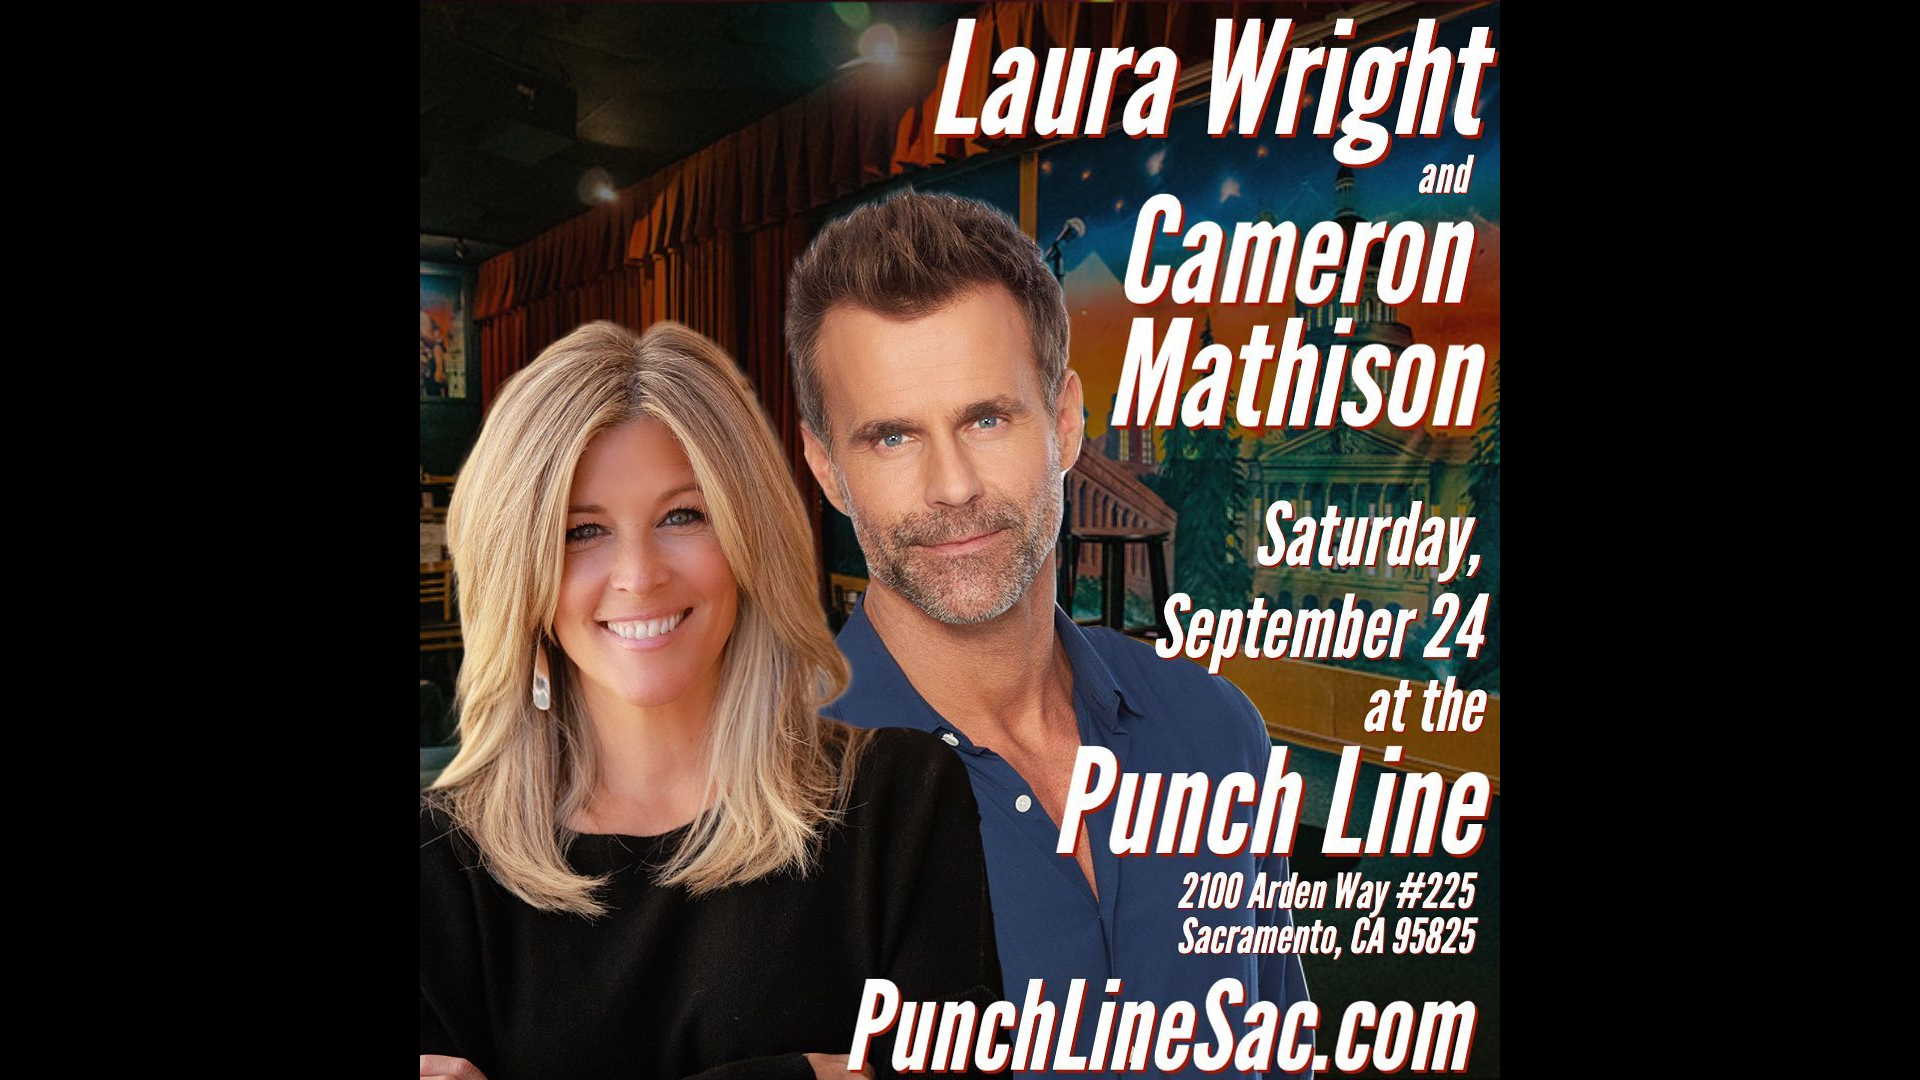 Laura Wright and Cameron Mathison from General Hospital